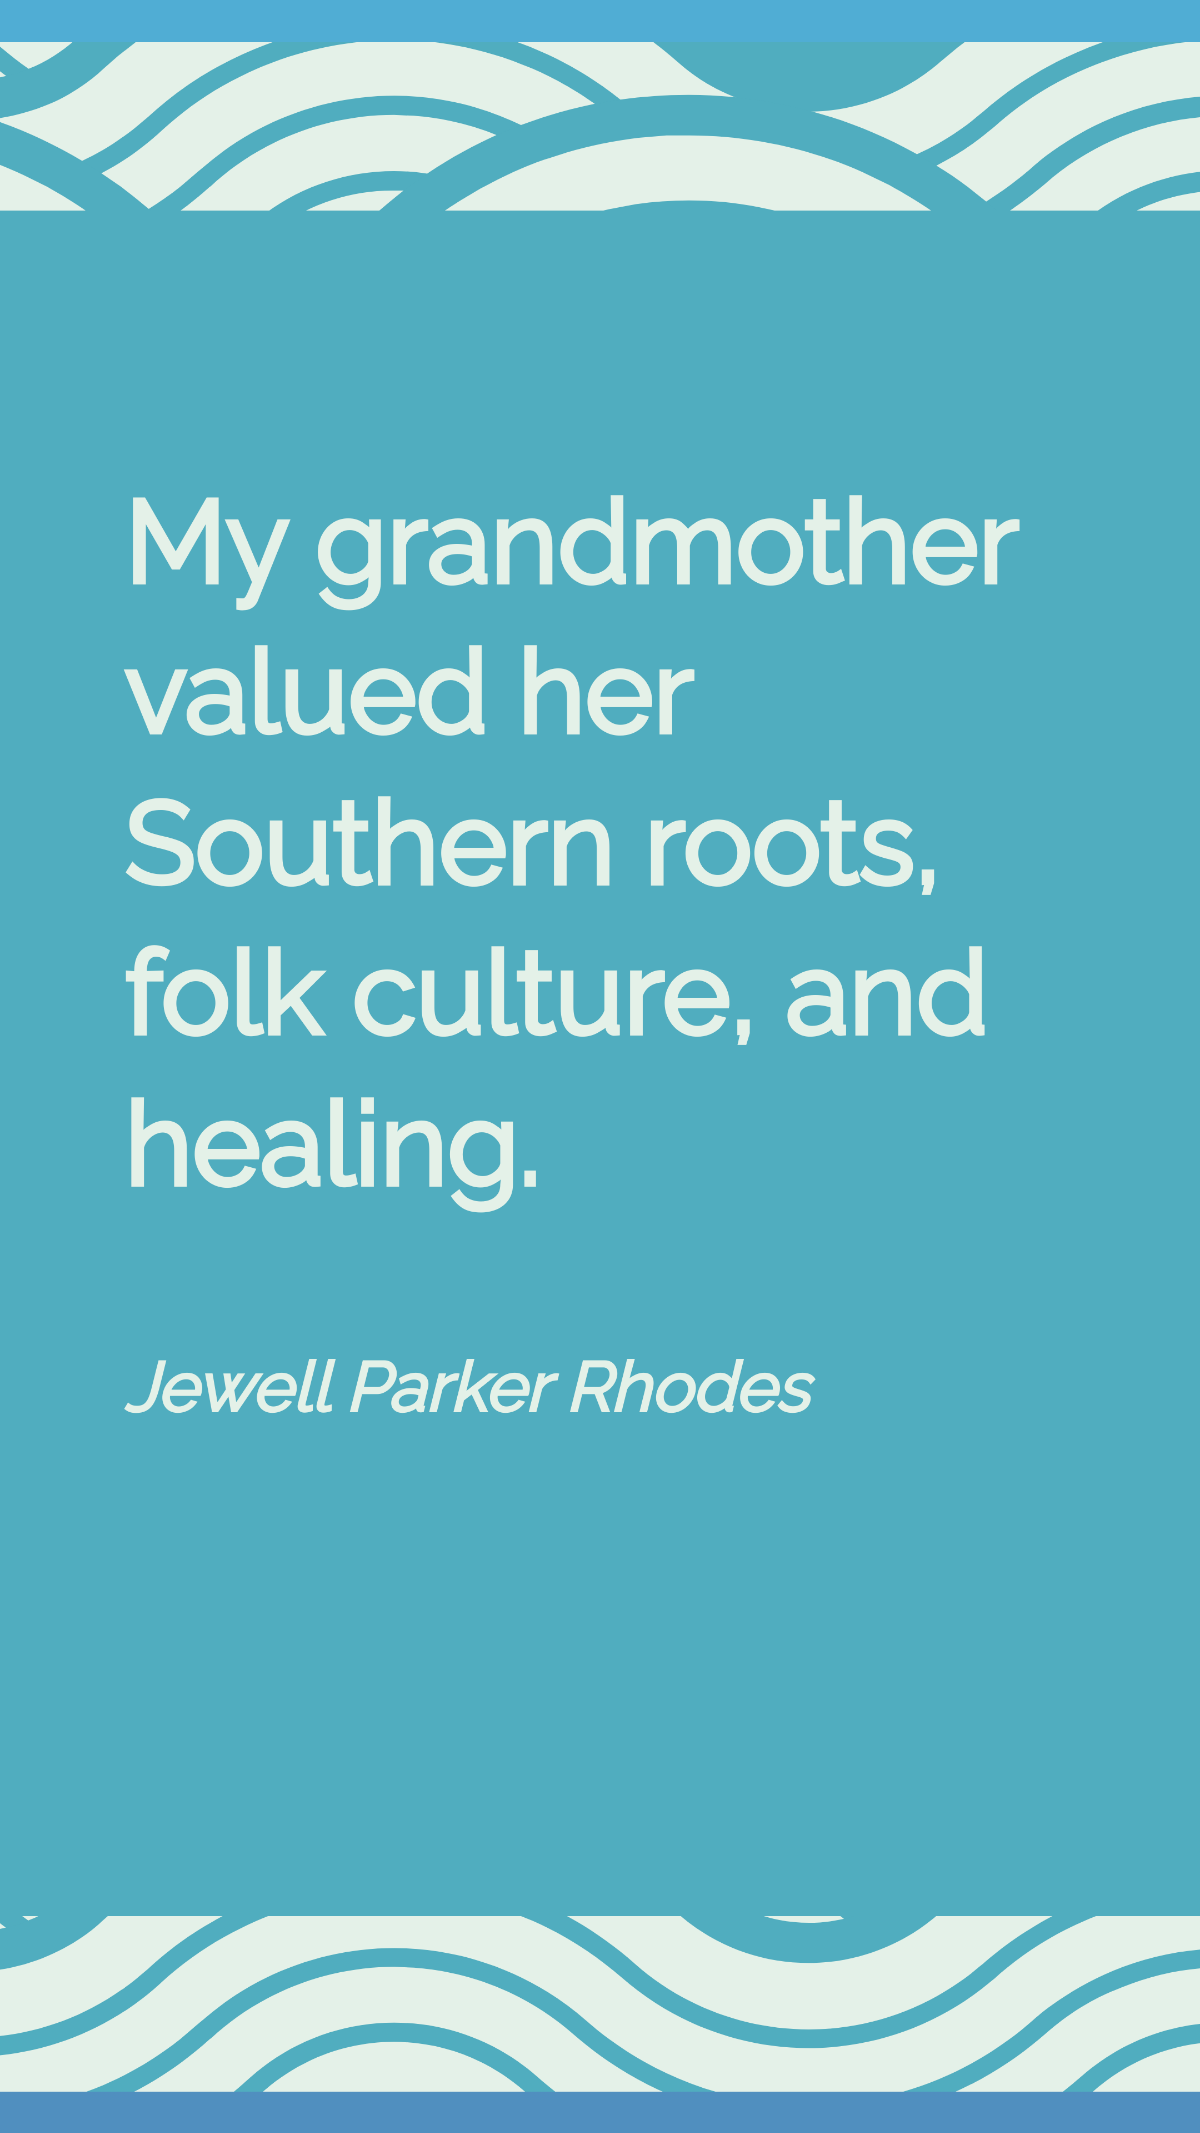 Jewell Parker Rhodes - My grandmother valued her Southern roots, folk culture, and healing. Template